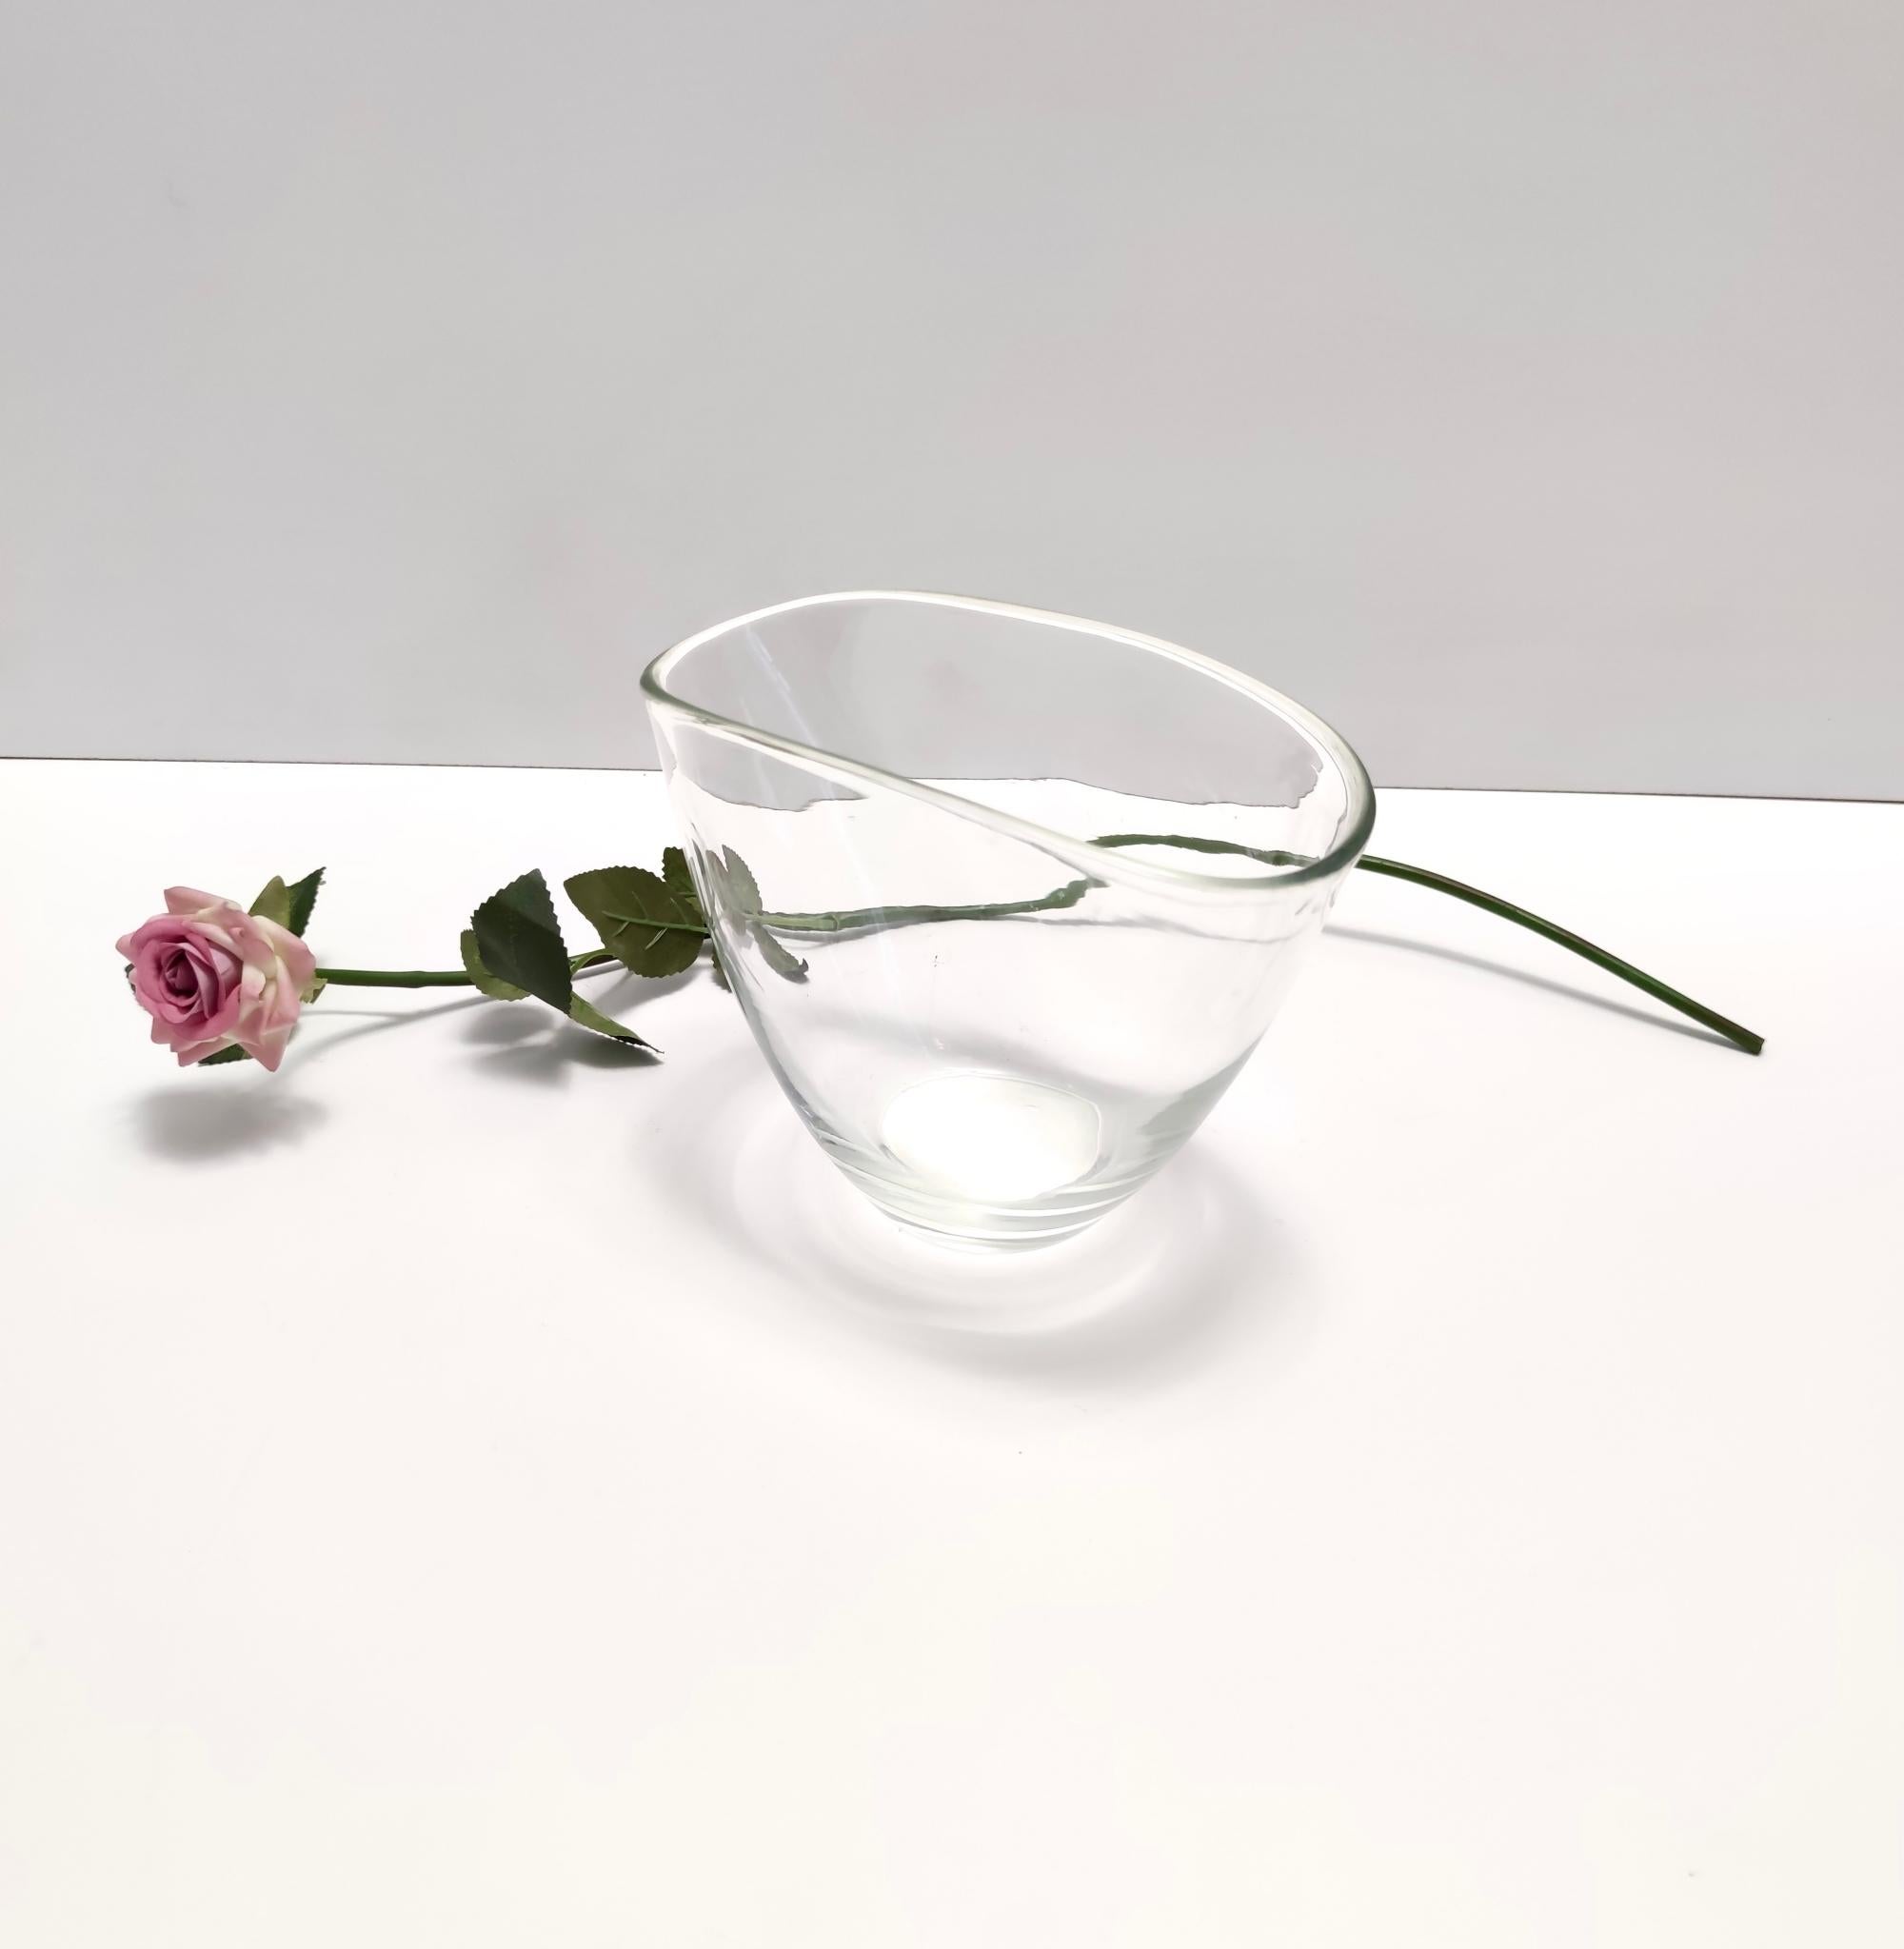 Made in Italy, 1950s. 
This is an elegant and essential hand-blown transparent Murano glass vase.
It is a vintage piece, therefore it might show slight traces of use, but it can be considered as in excellent original condition and ready to become a